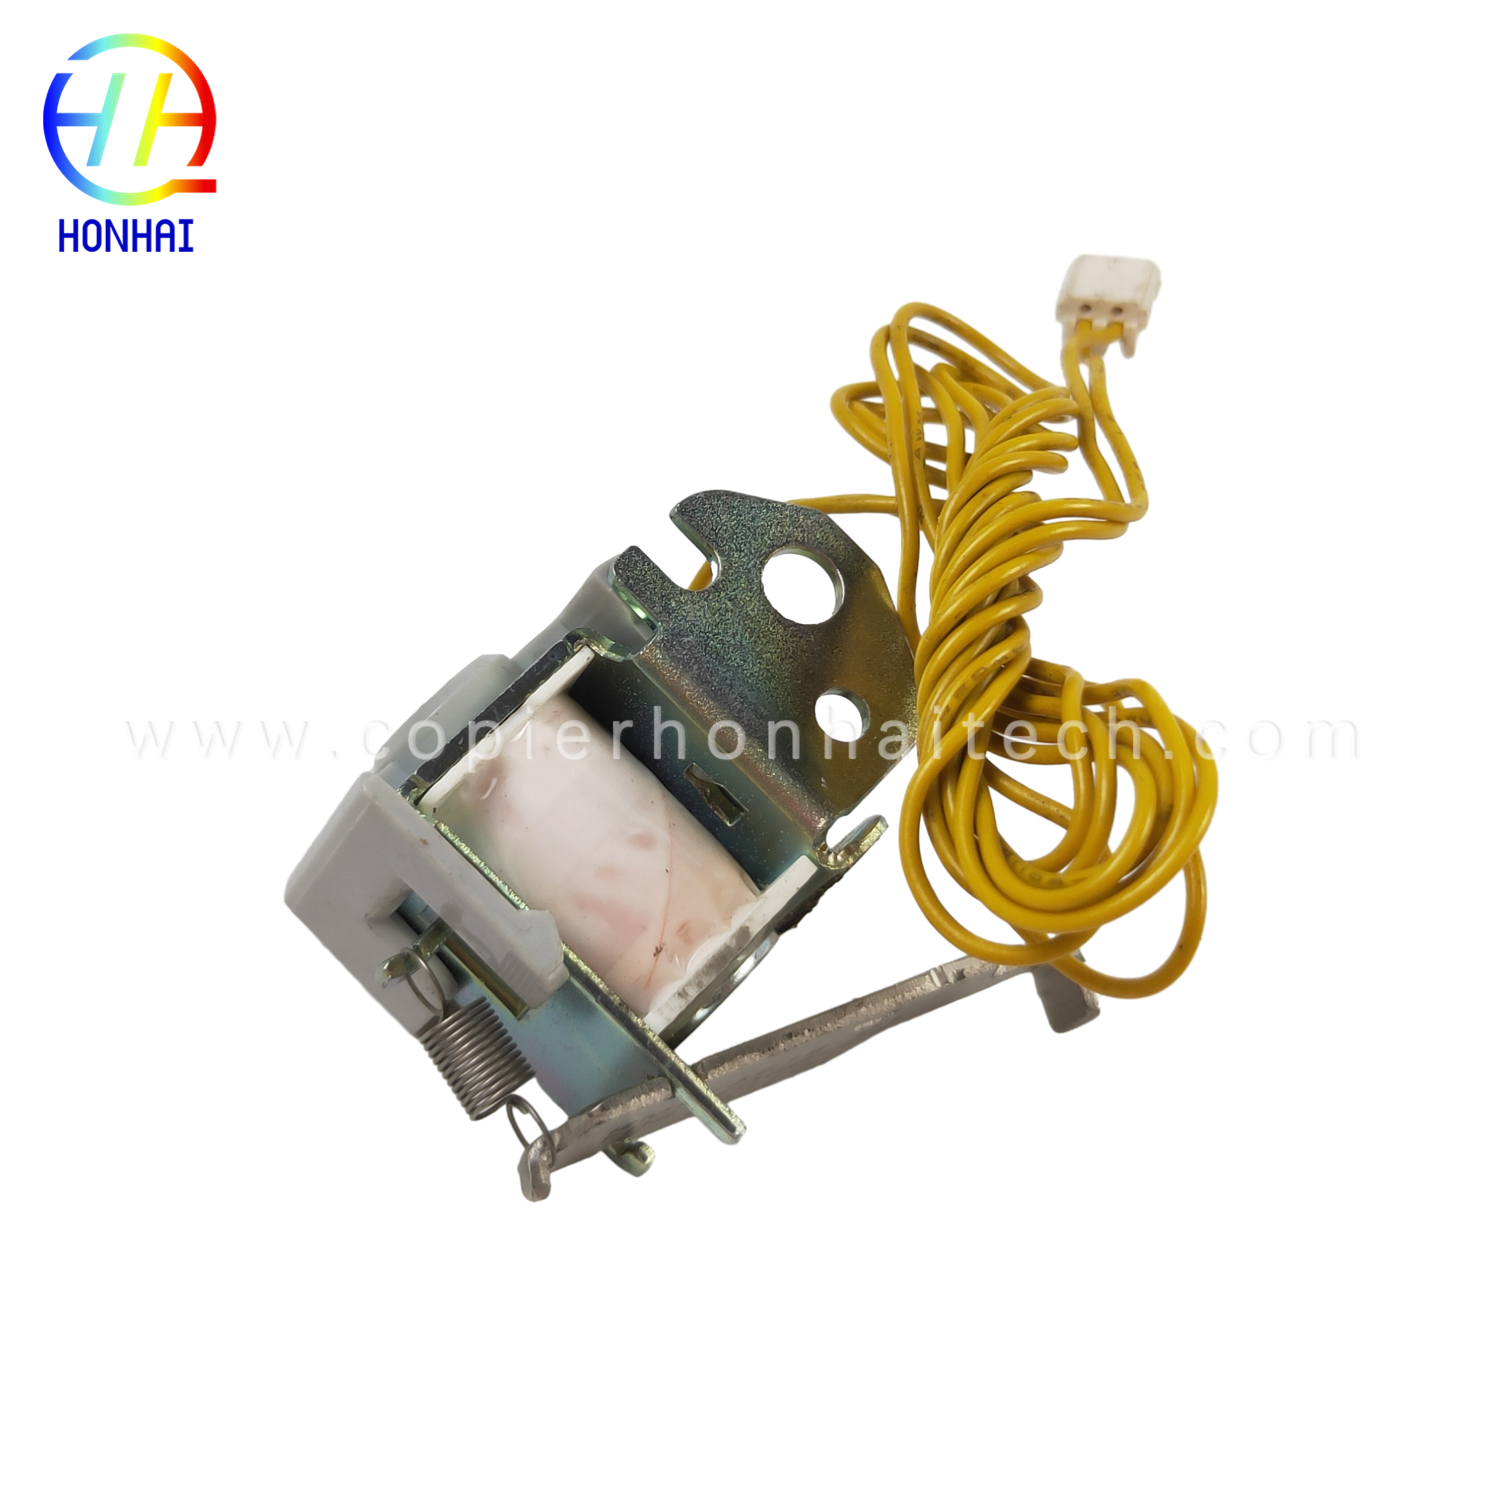 Relay Solenoid RM1-4618 Fit for HP P1007 1212 M1132 P1005 P1102 P1108